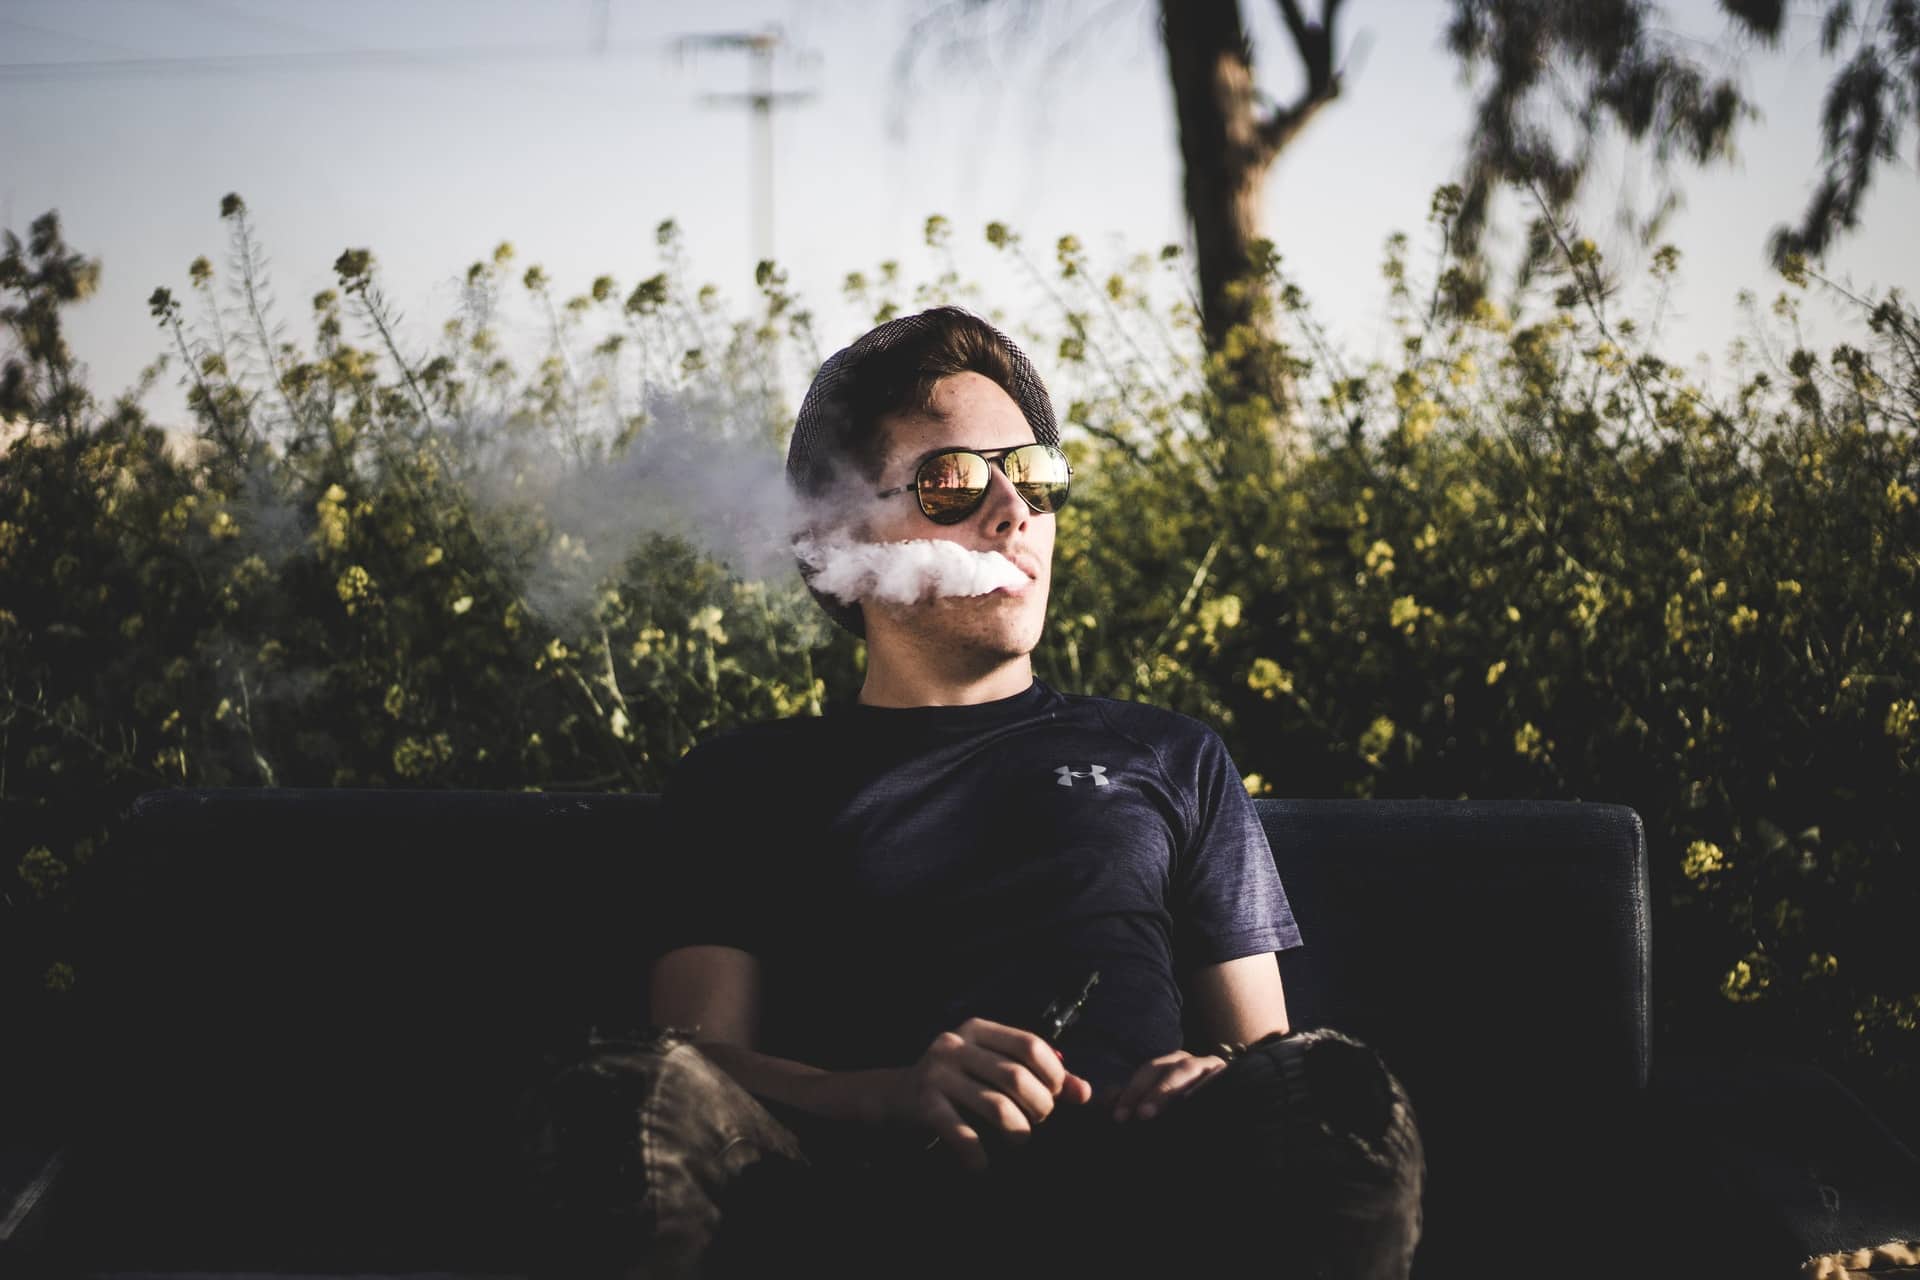 Everything You Need to Know About Disposable Vapes